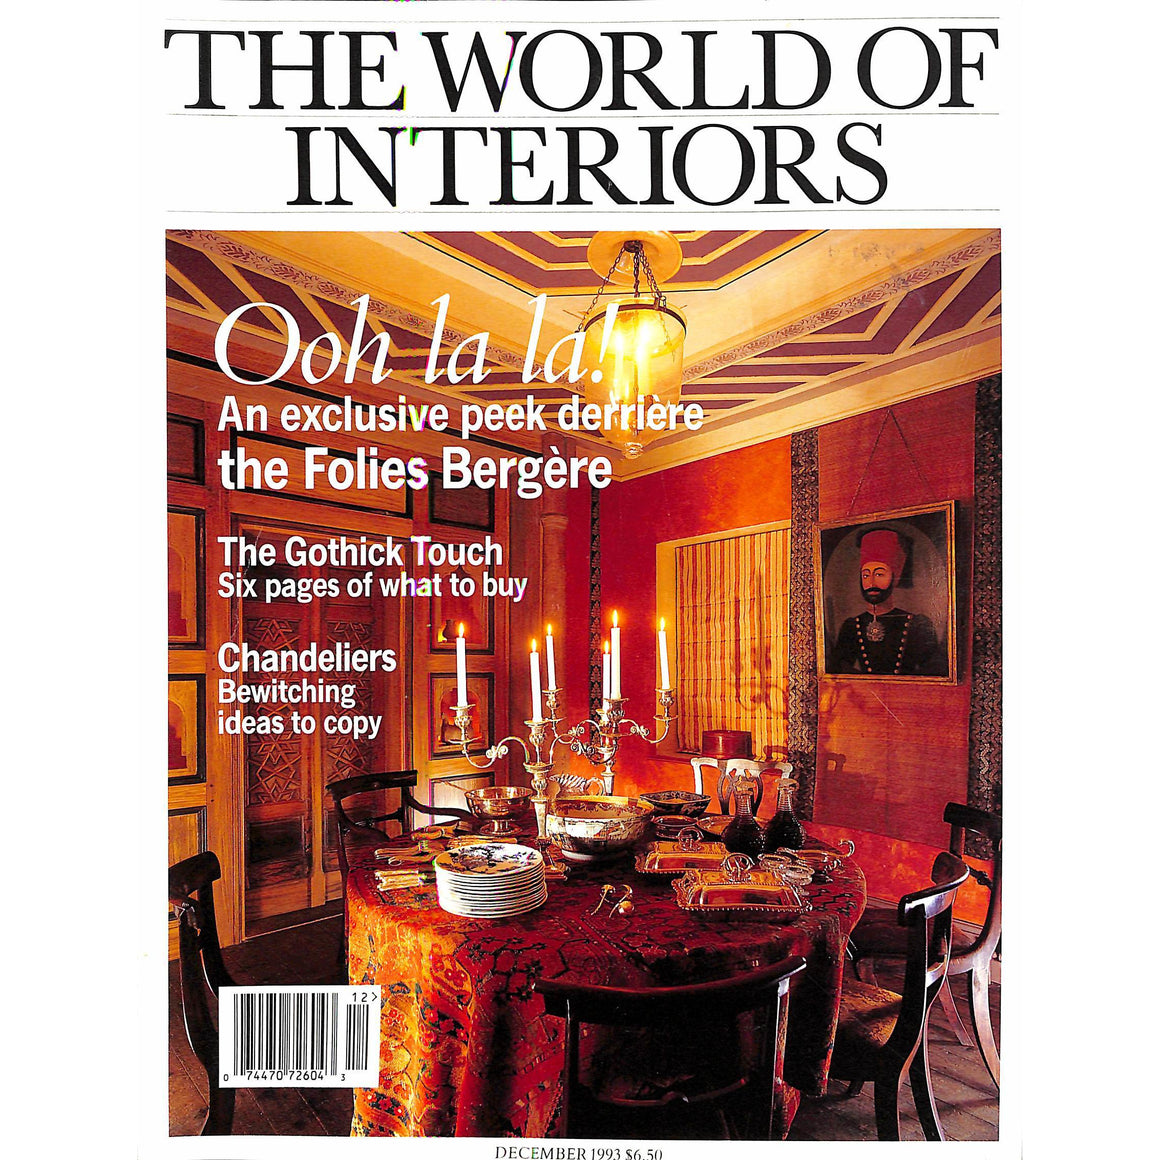 The World Of Interiors December 1993 (SOLD)